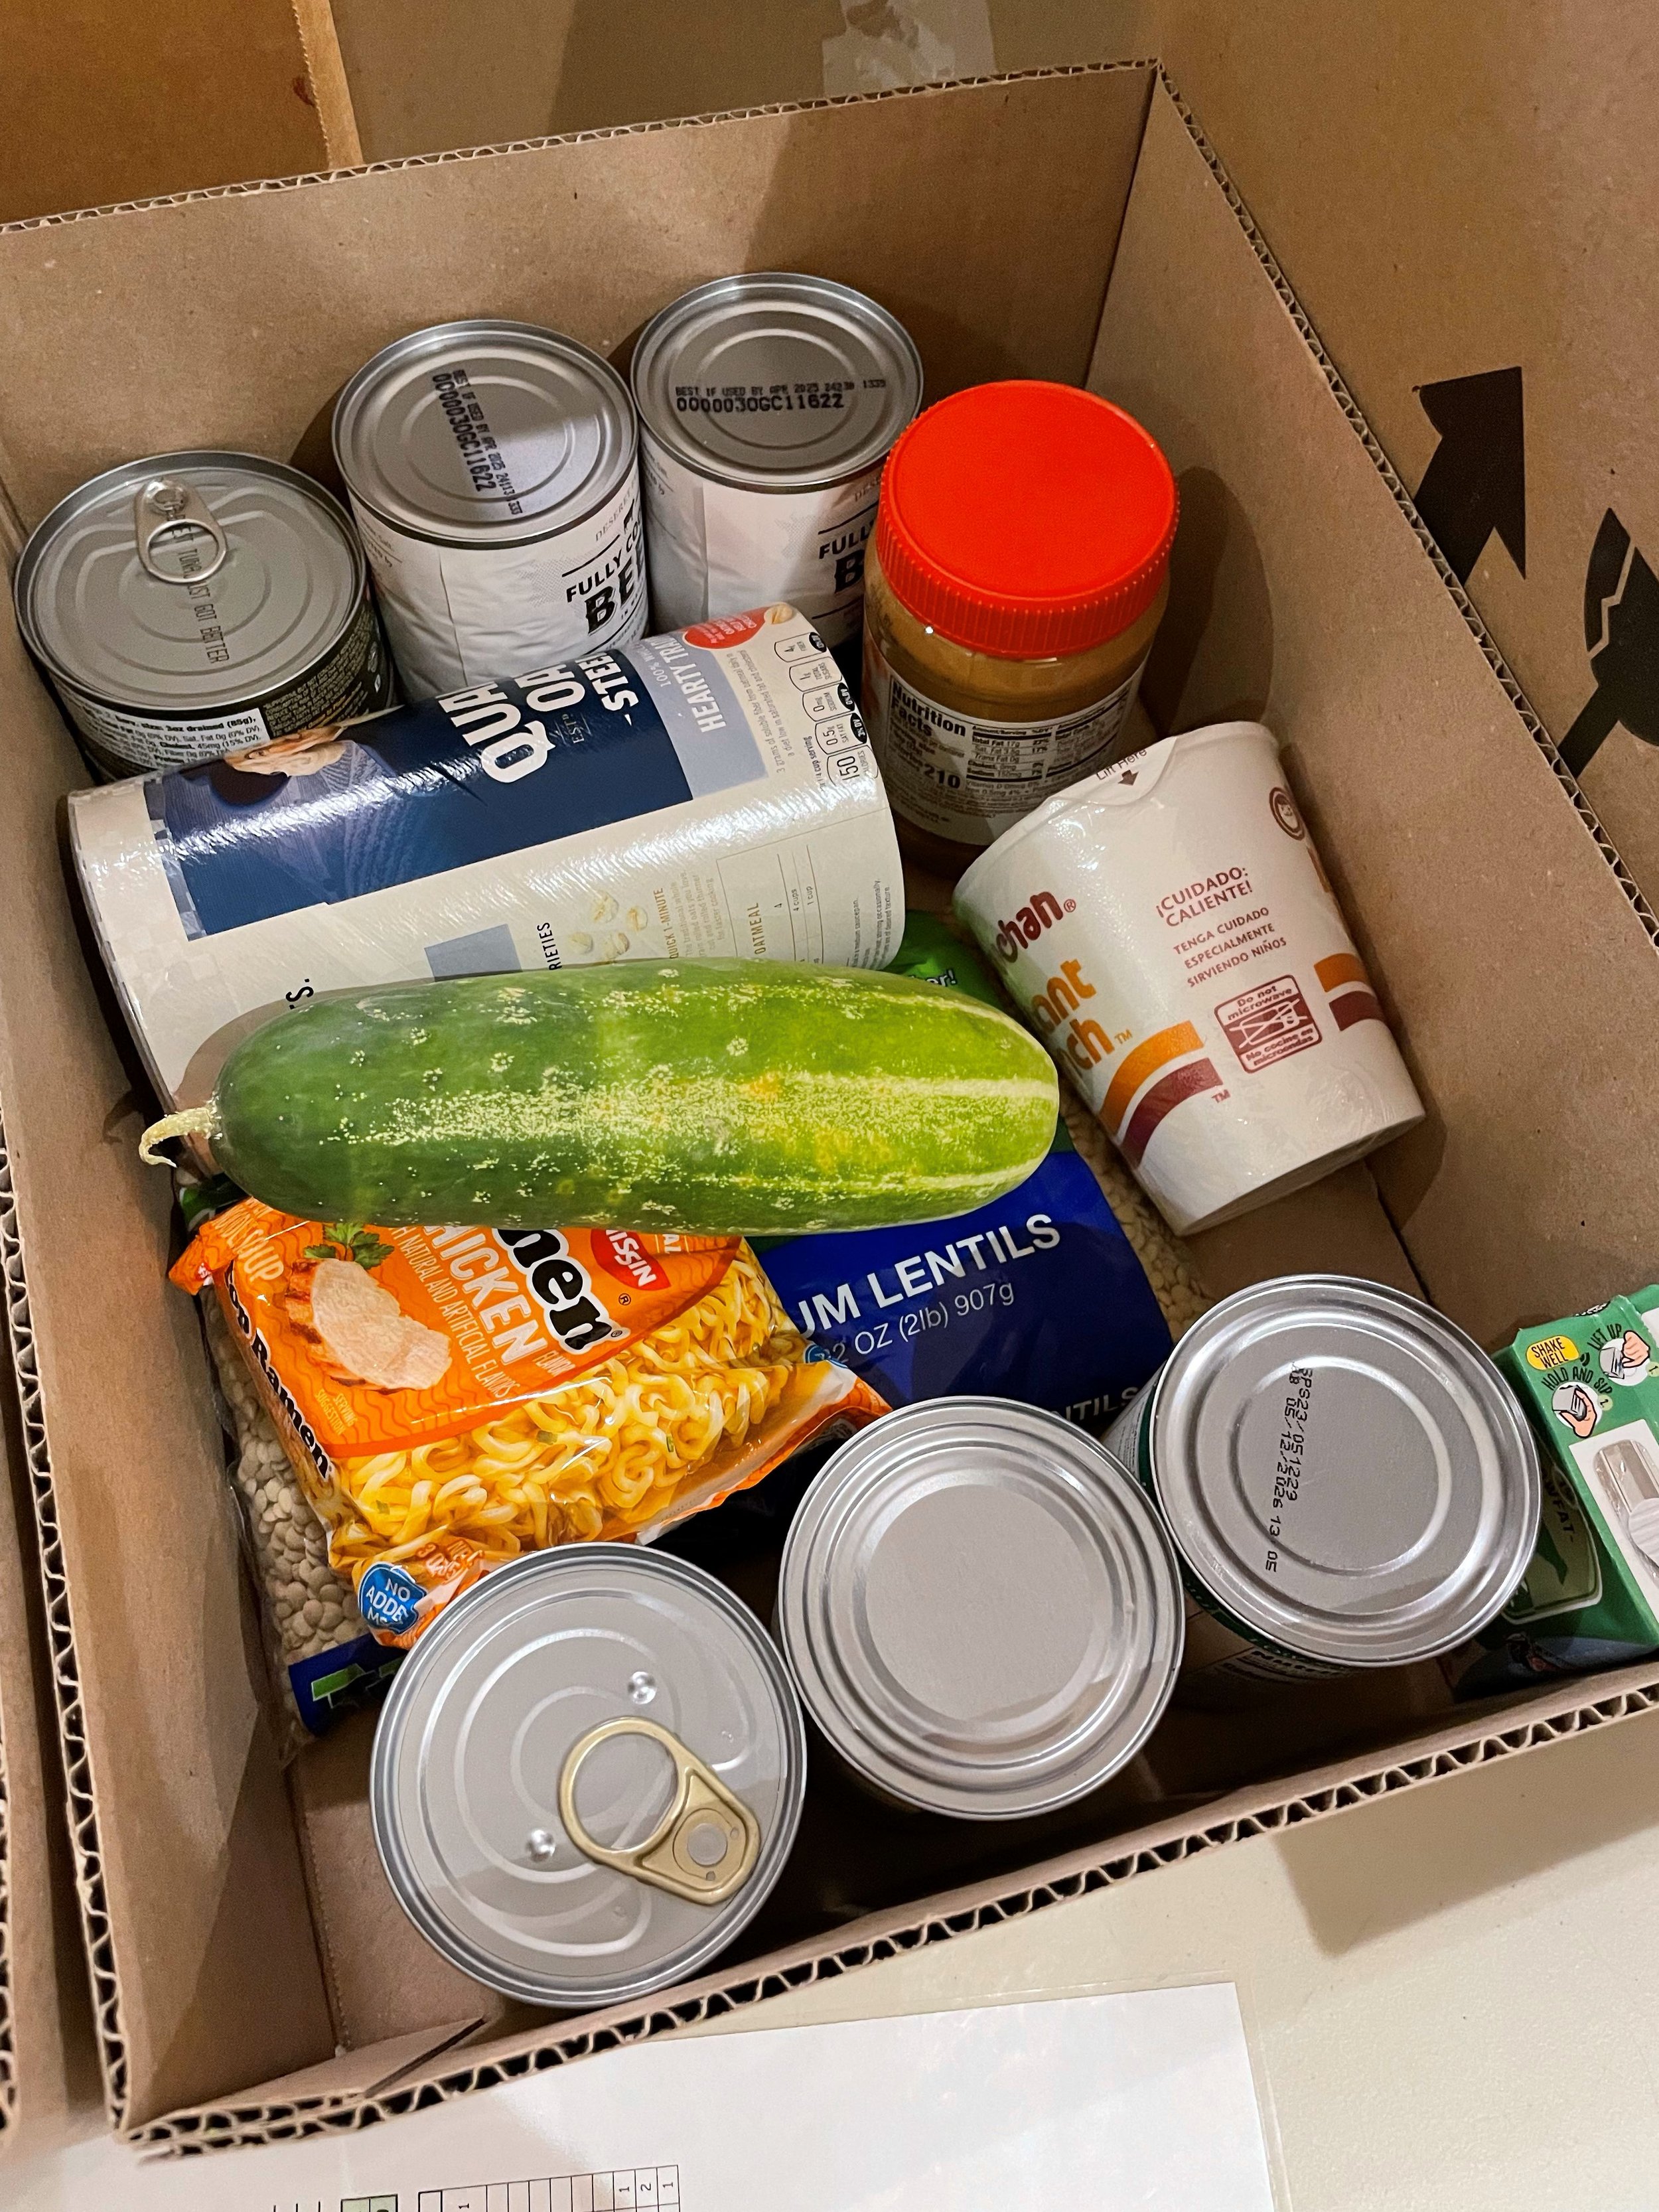  A cardboard box full of food donations is shown. The donations include several cans, peanut butter, ramen, oatmeal, lentils and a cucumber from the NW Works Garden. 